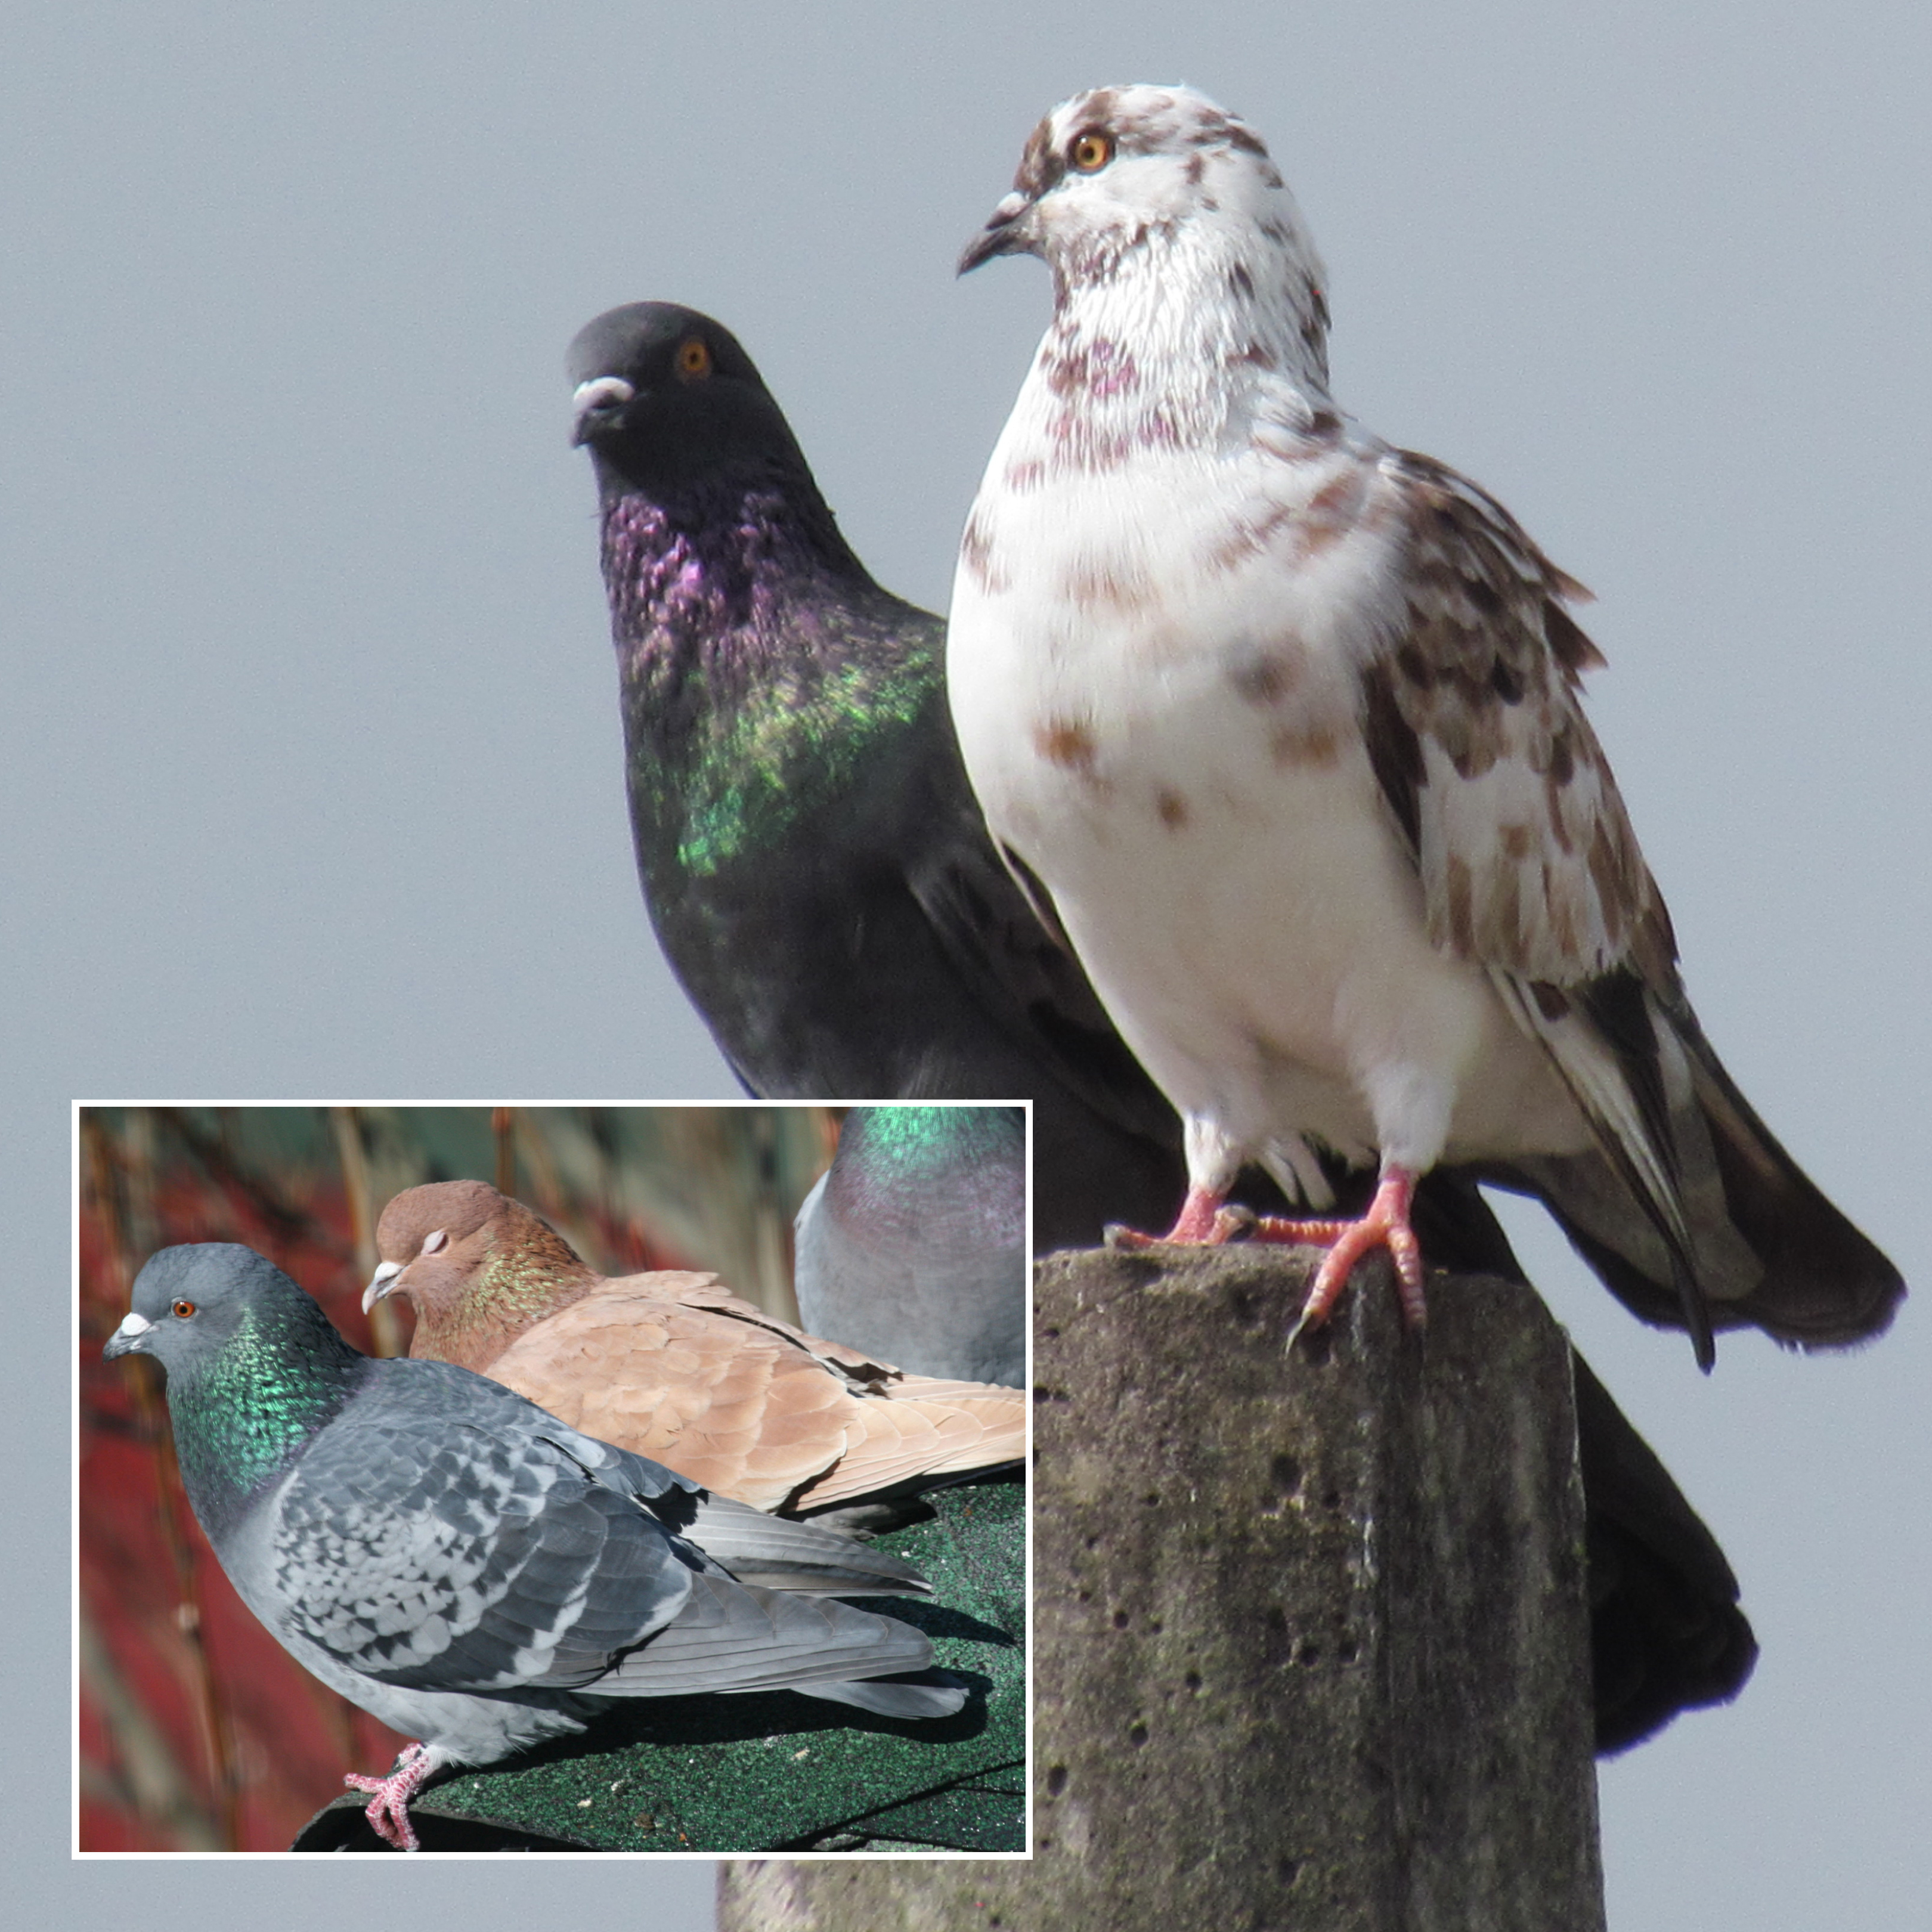 What Is The Difference Between Pigeons And Doves?